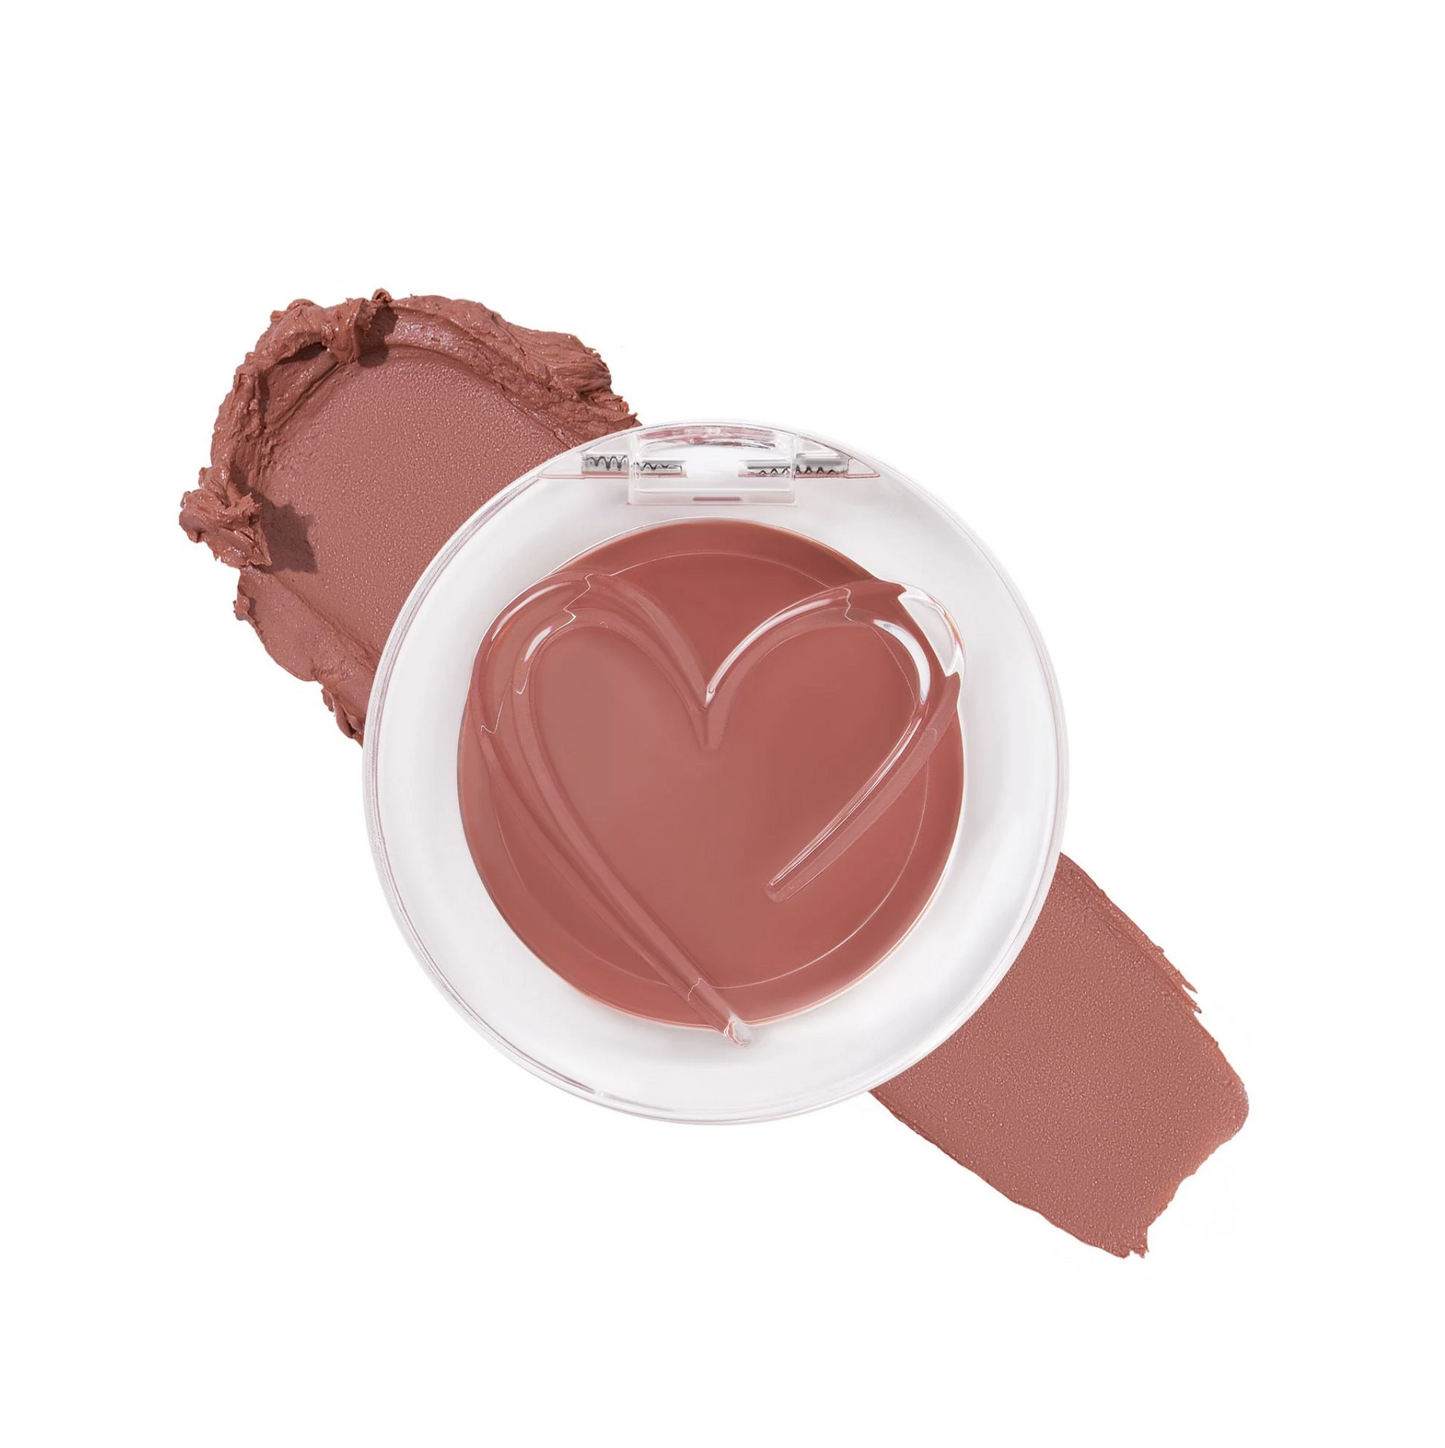 LIP AND CHEEK BALM - DON'T SAY IT TWICE - DUSTY ROSE